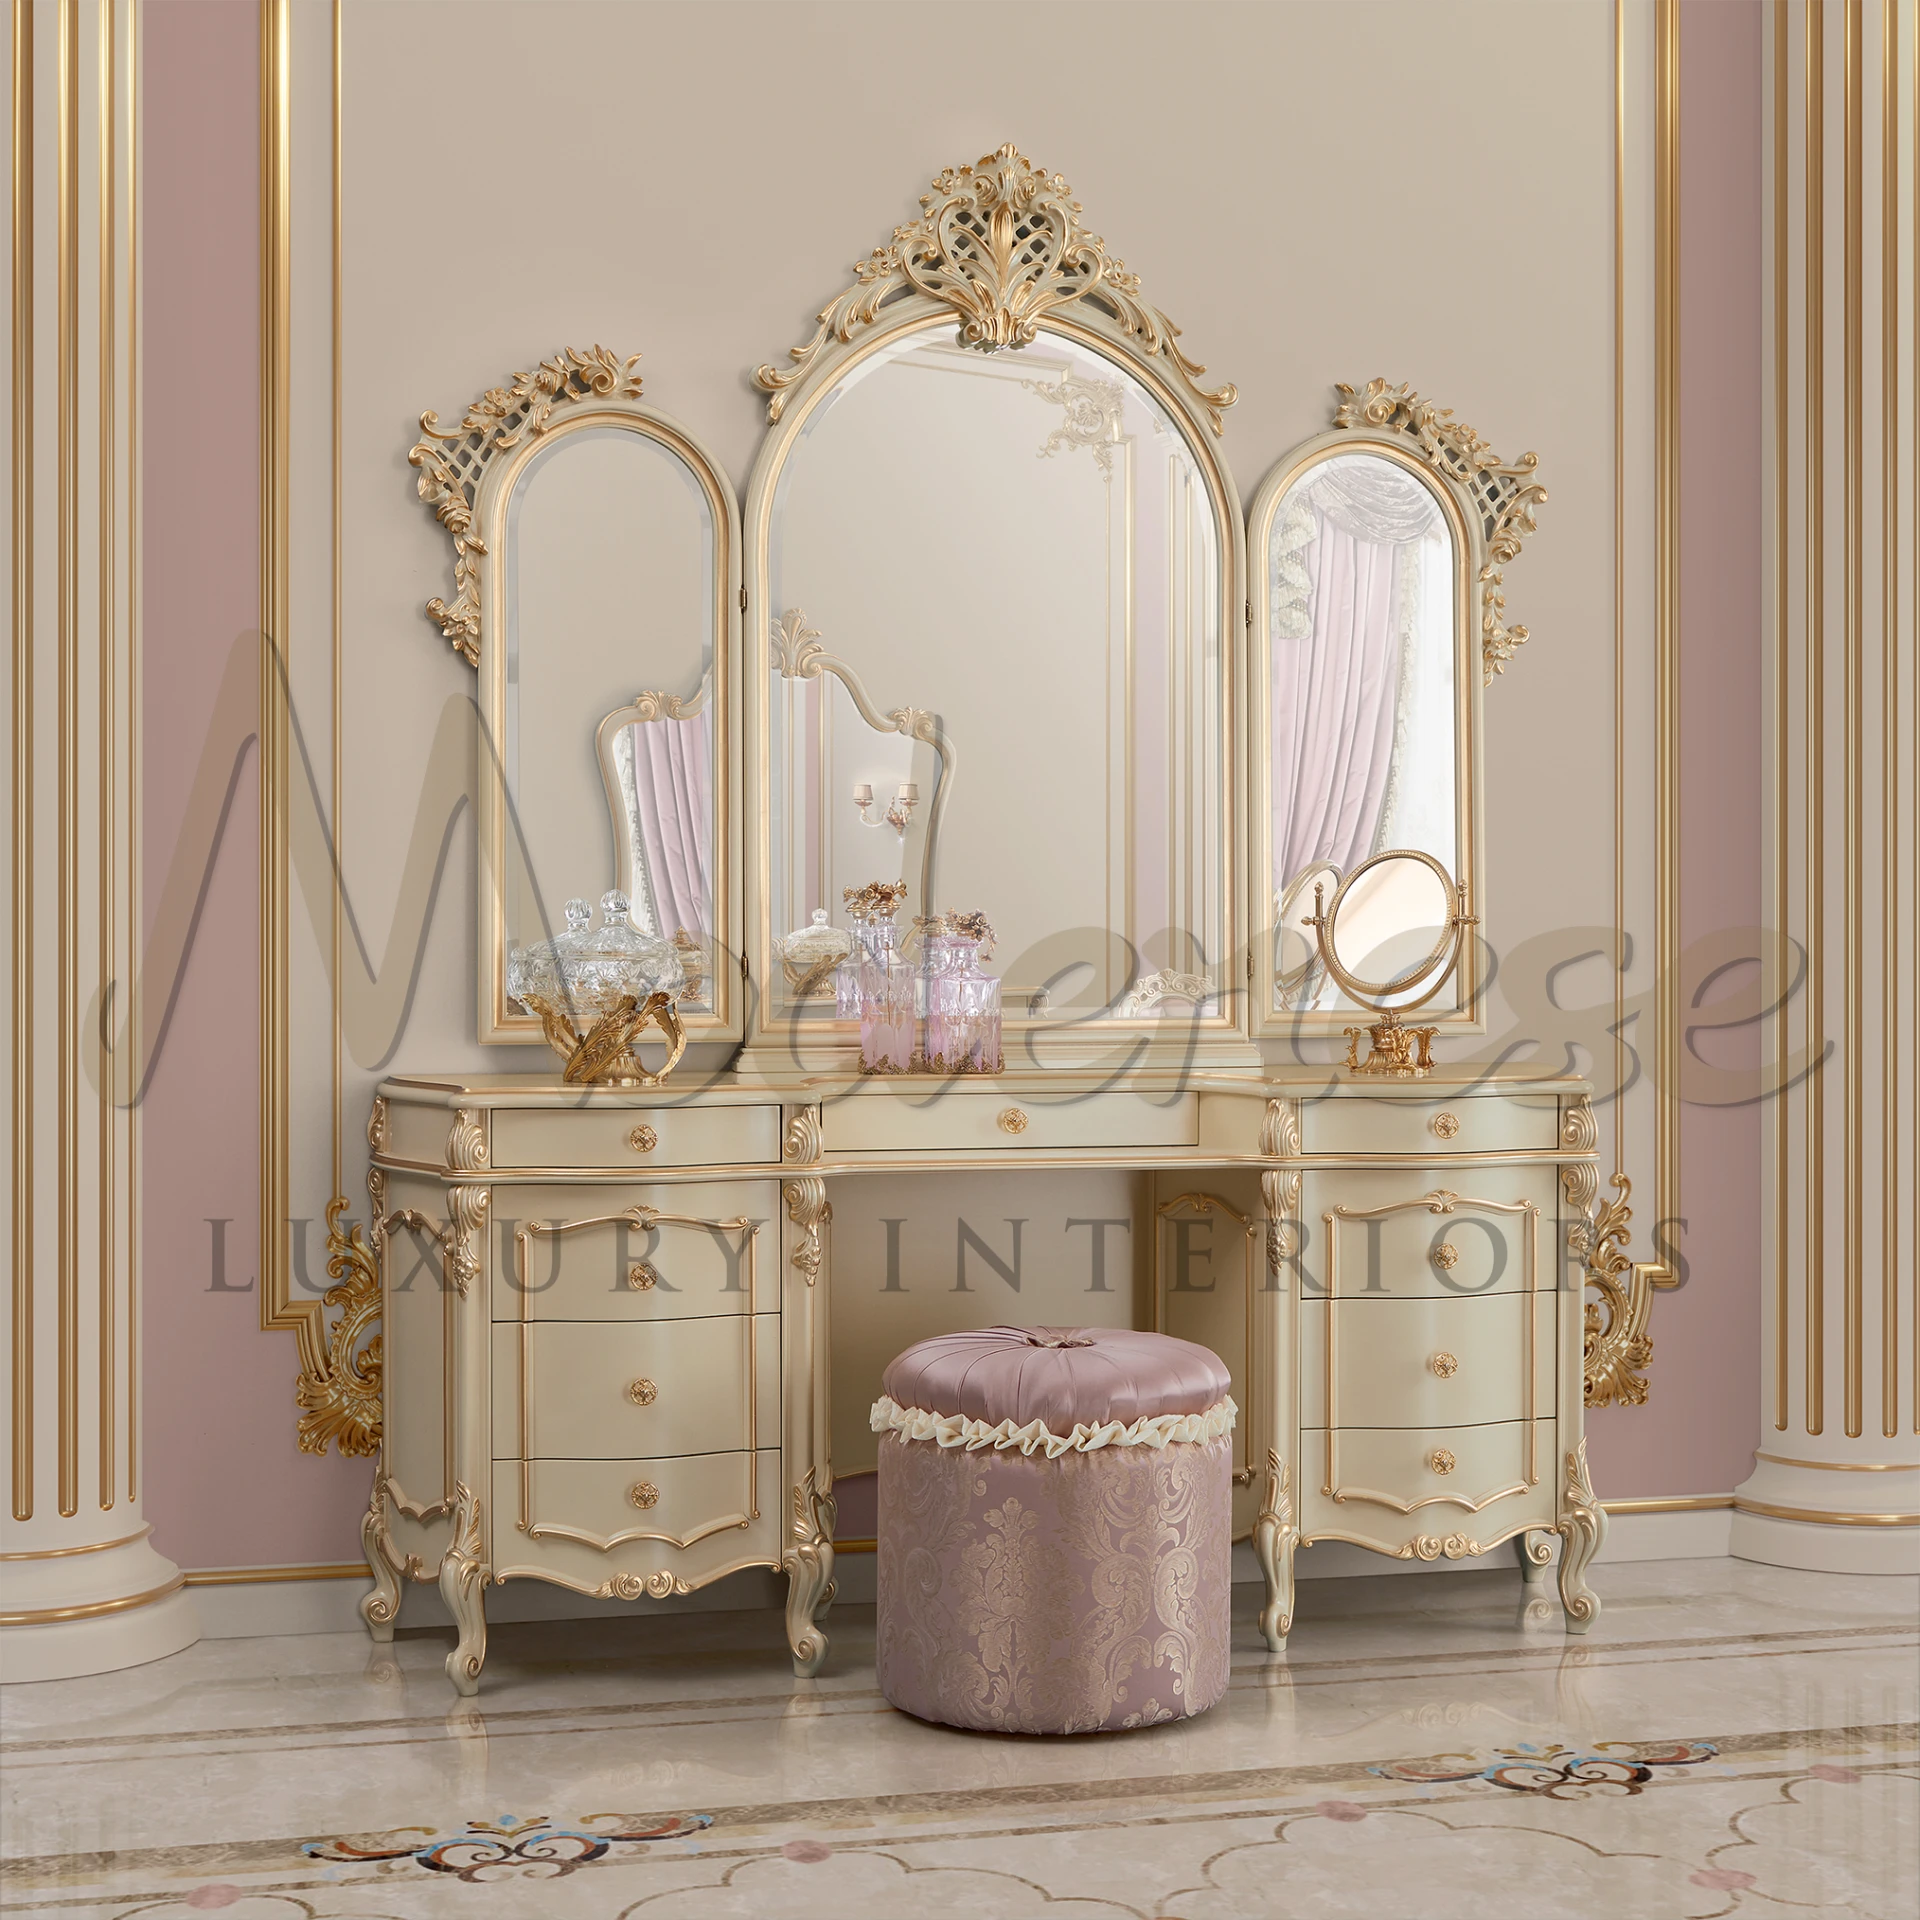 Elegant and large, this ornate gold mirror enhances home decor with its classic baroque style and craftsmanship.